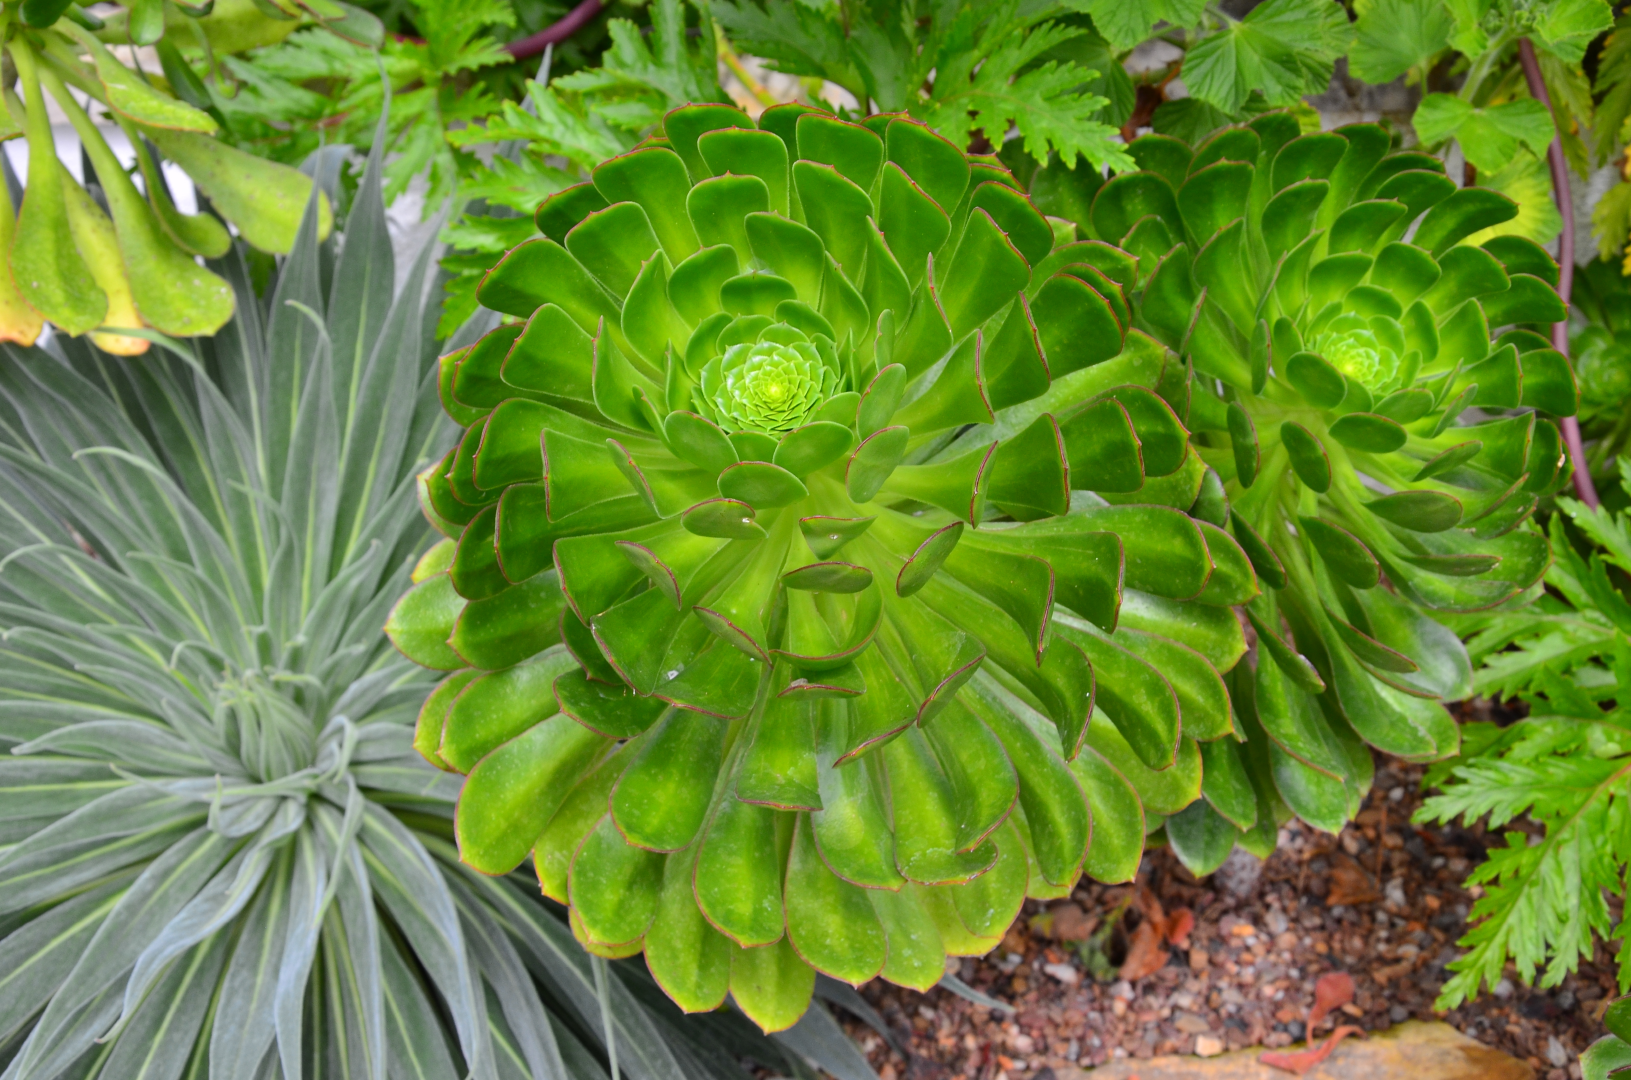 Plant with rotational symmetry